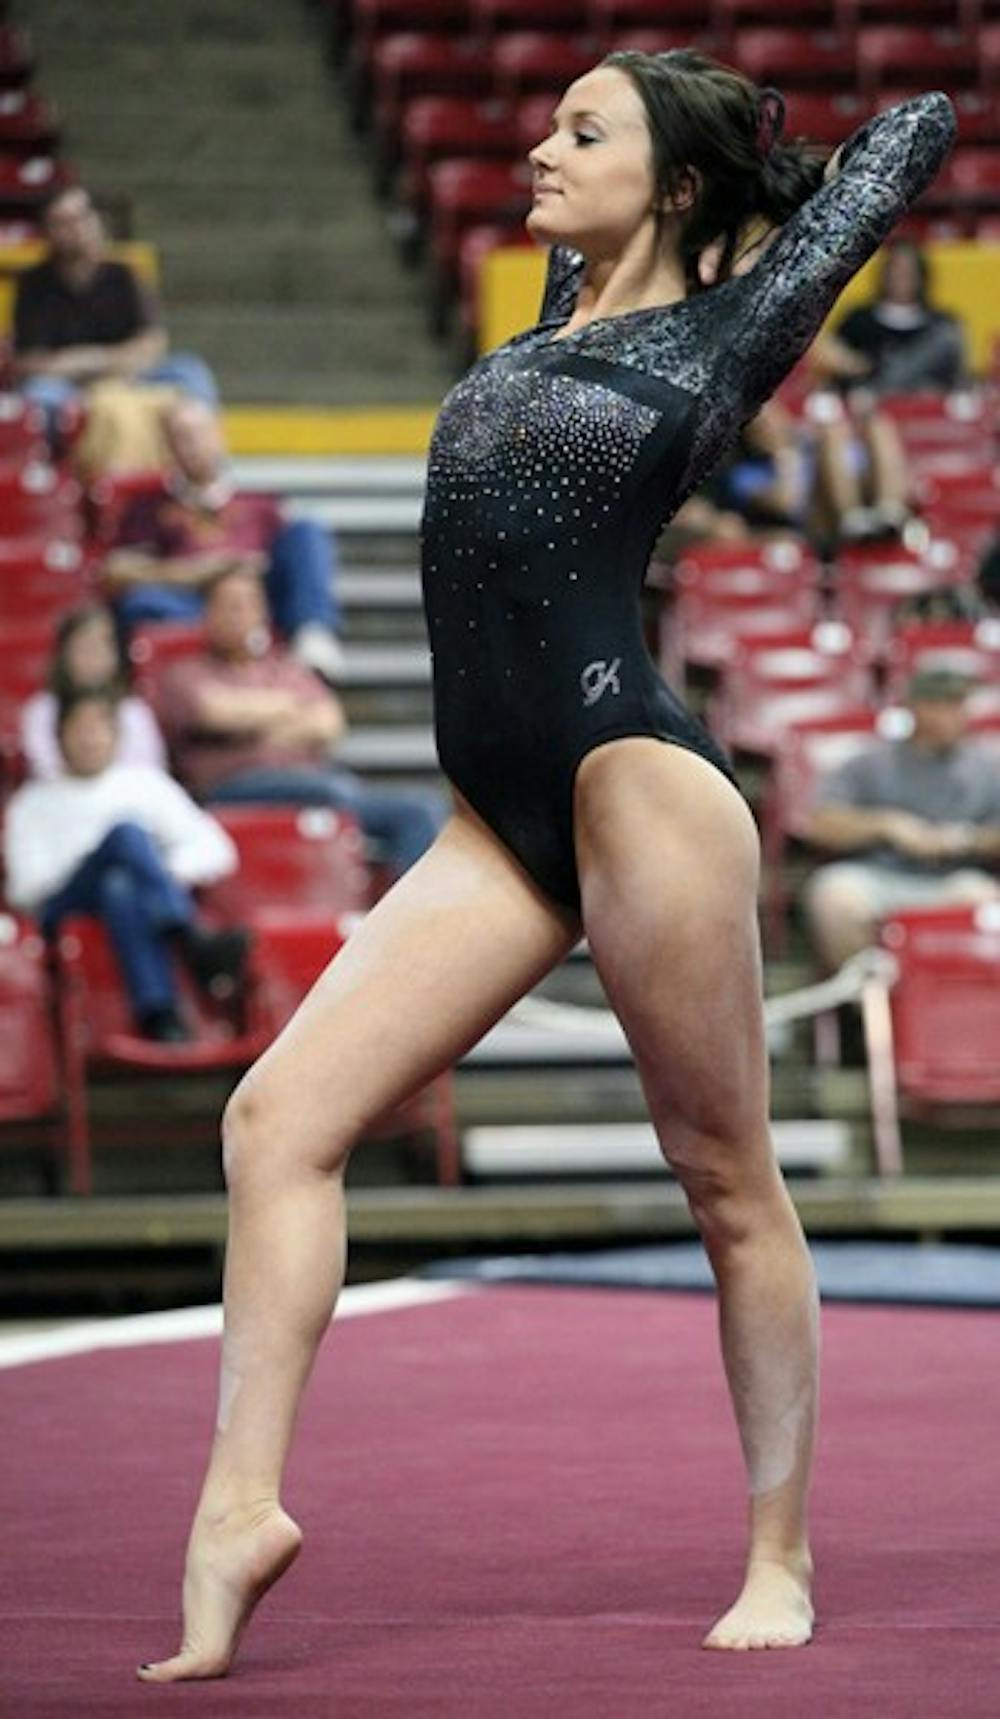 CROSSING THE PACIFIC: Senior gymnast Kaitlynn Bormann was born in South Korea and then adopted by an American family. (Photo by Nikolai de Vera)